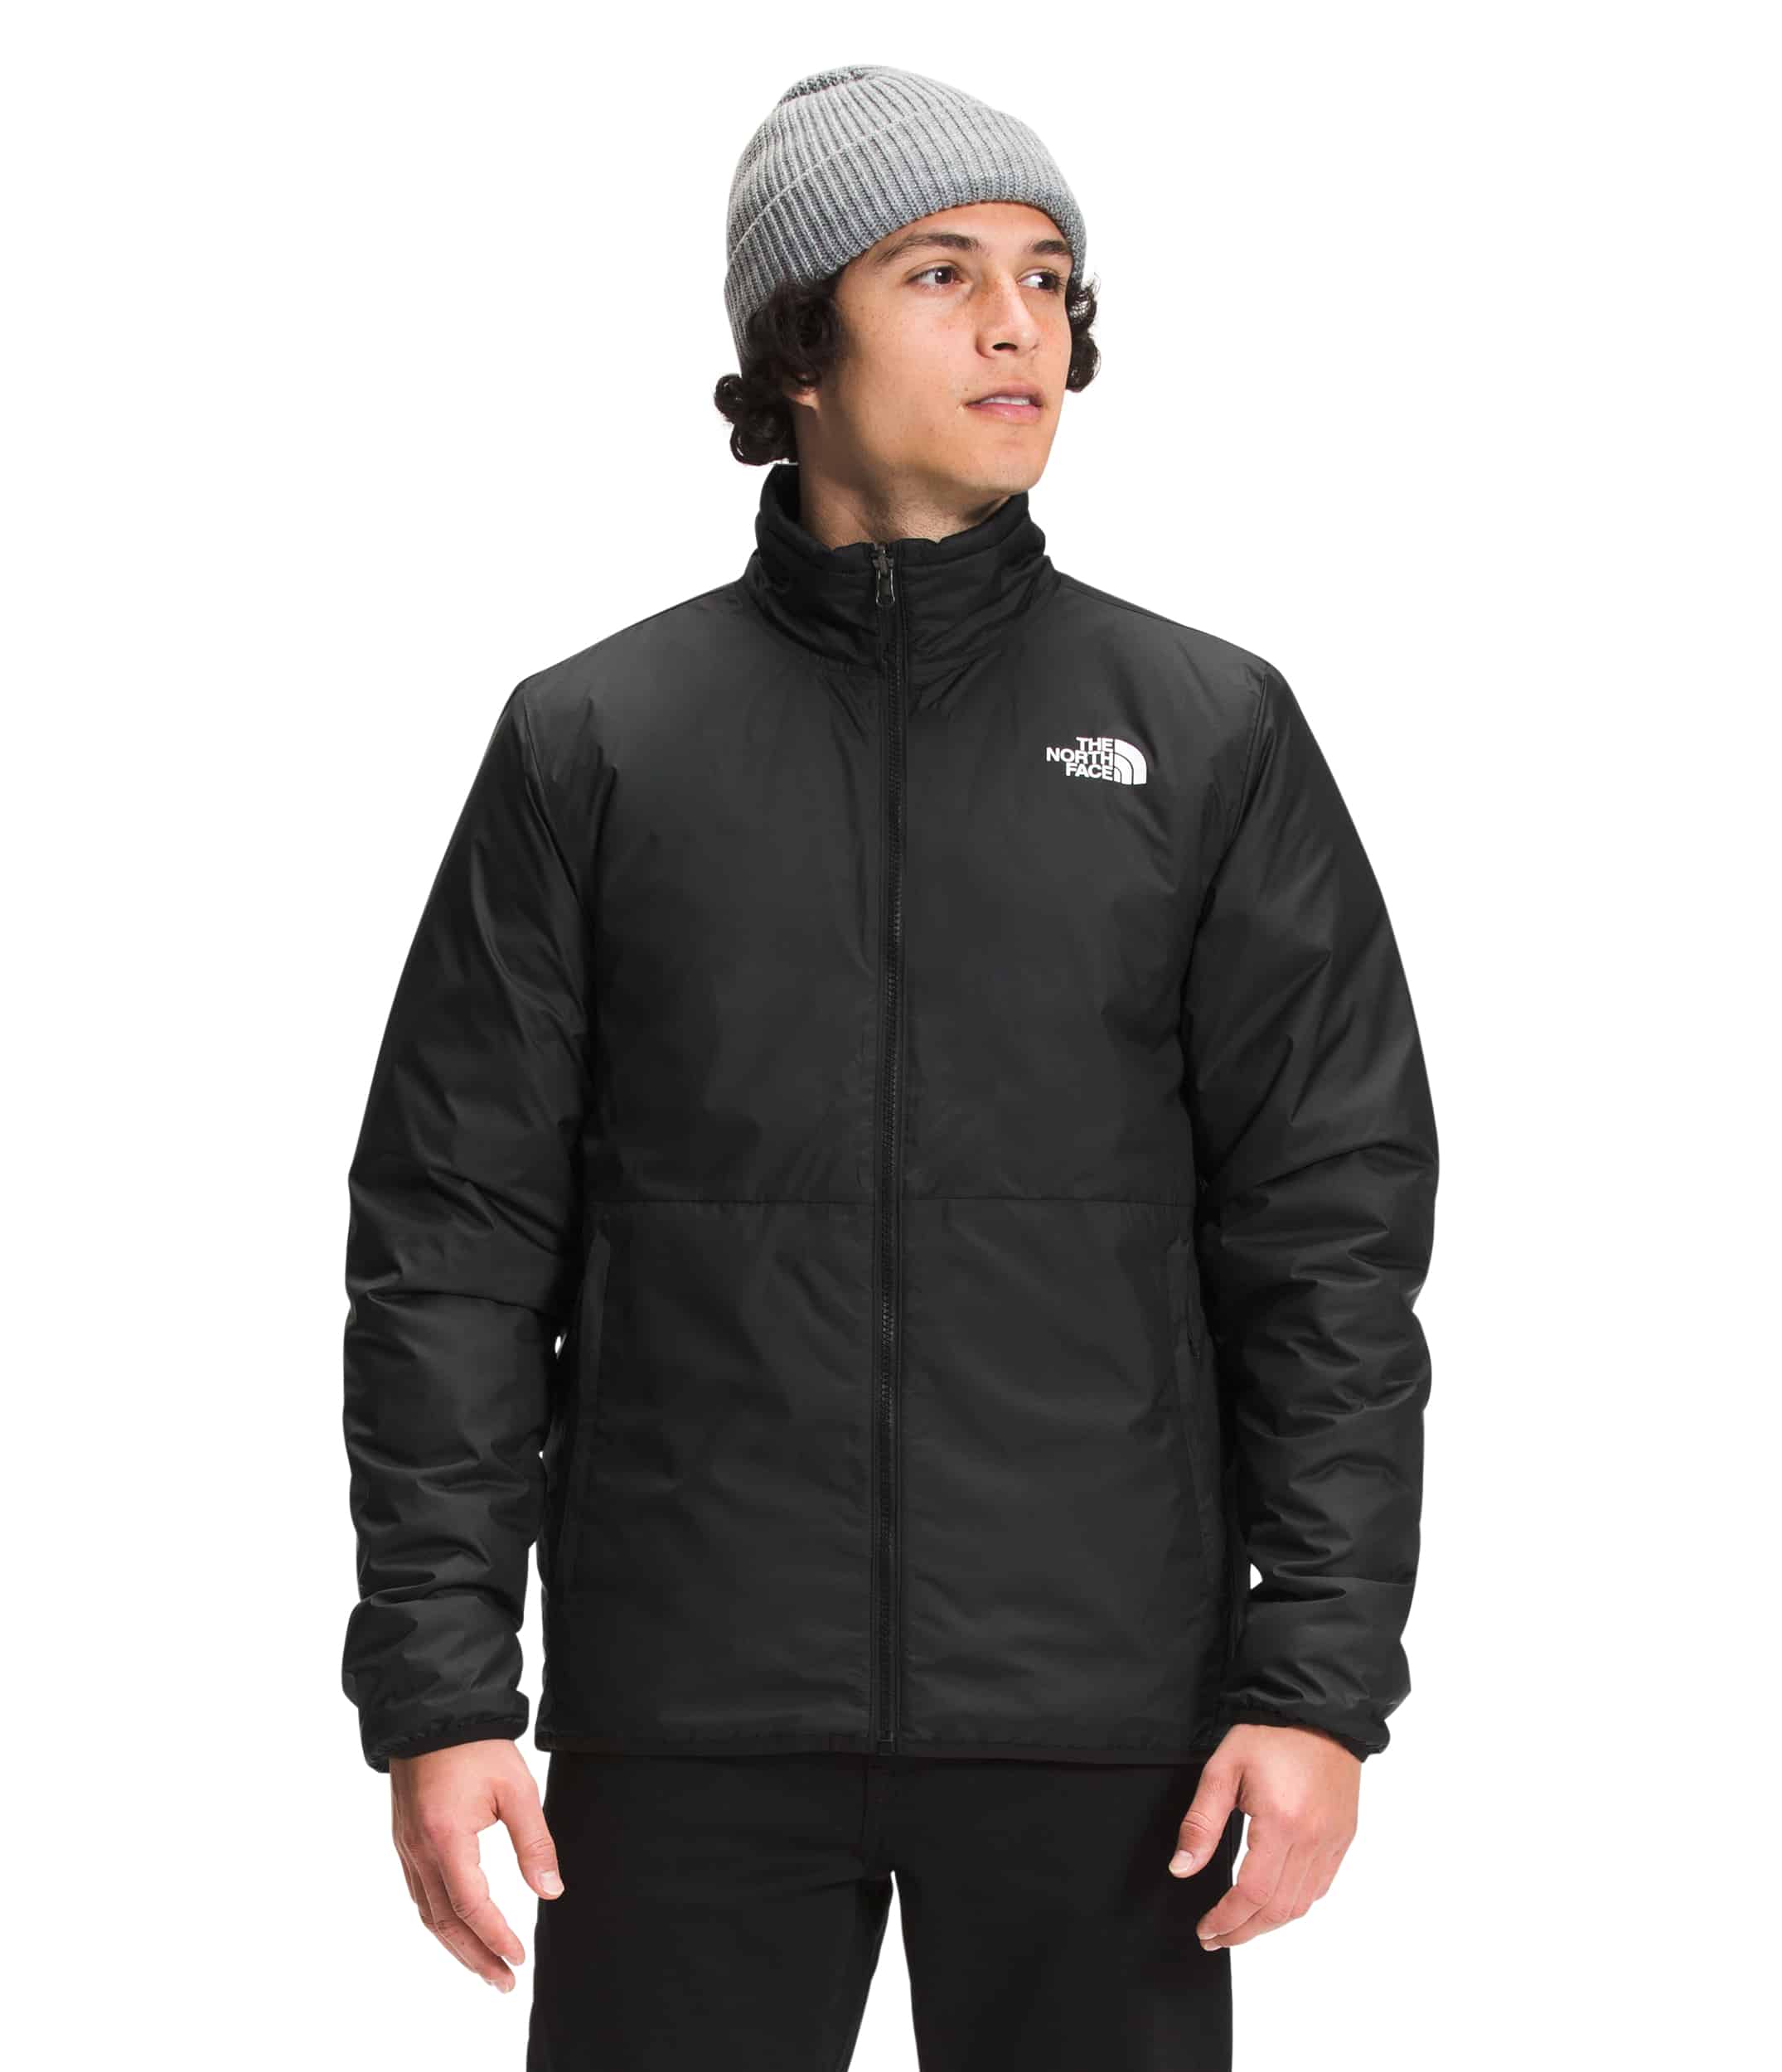 Prairie Summit Shop - The North Face Men's Carto Triclimate Jacket